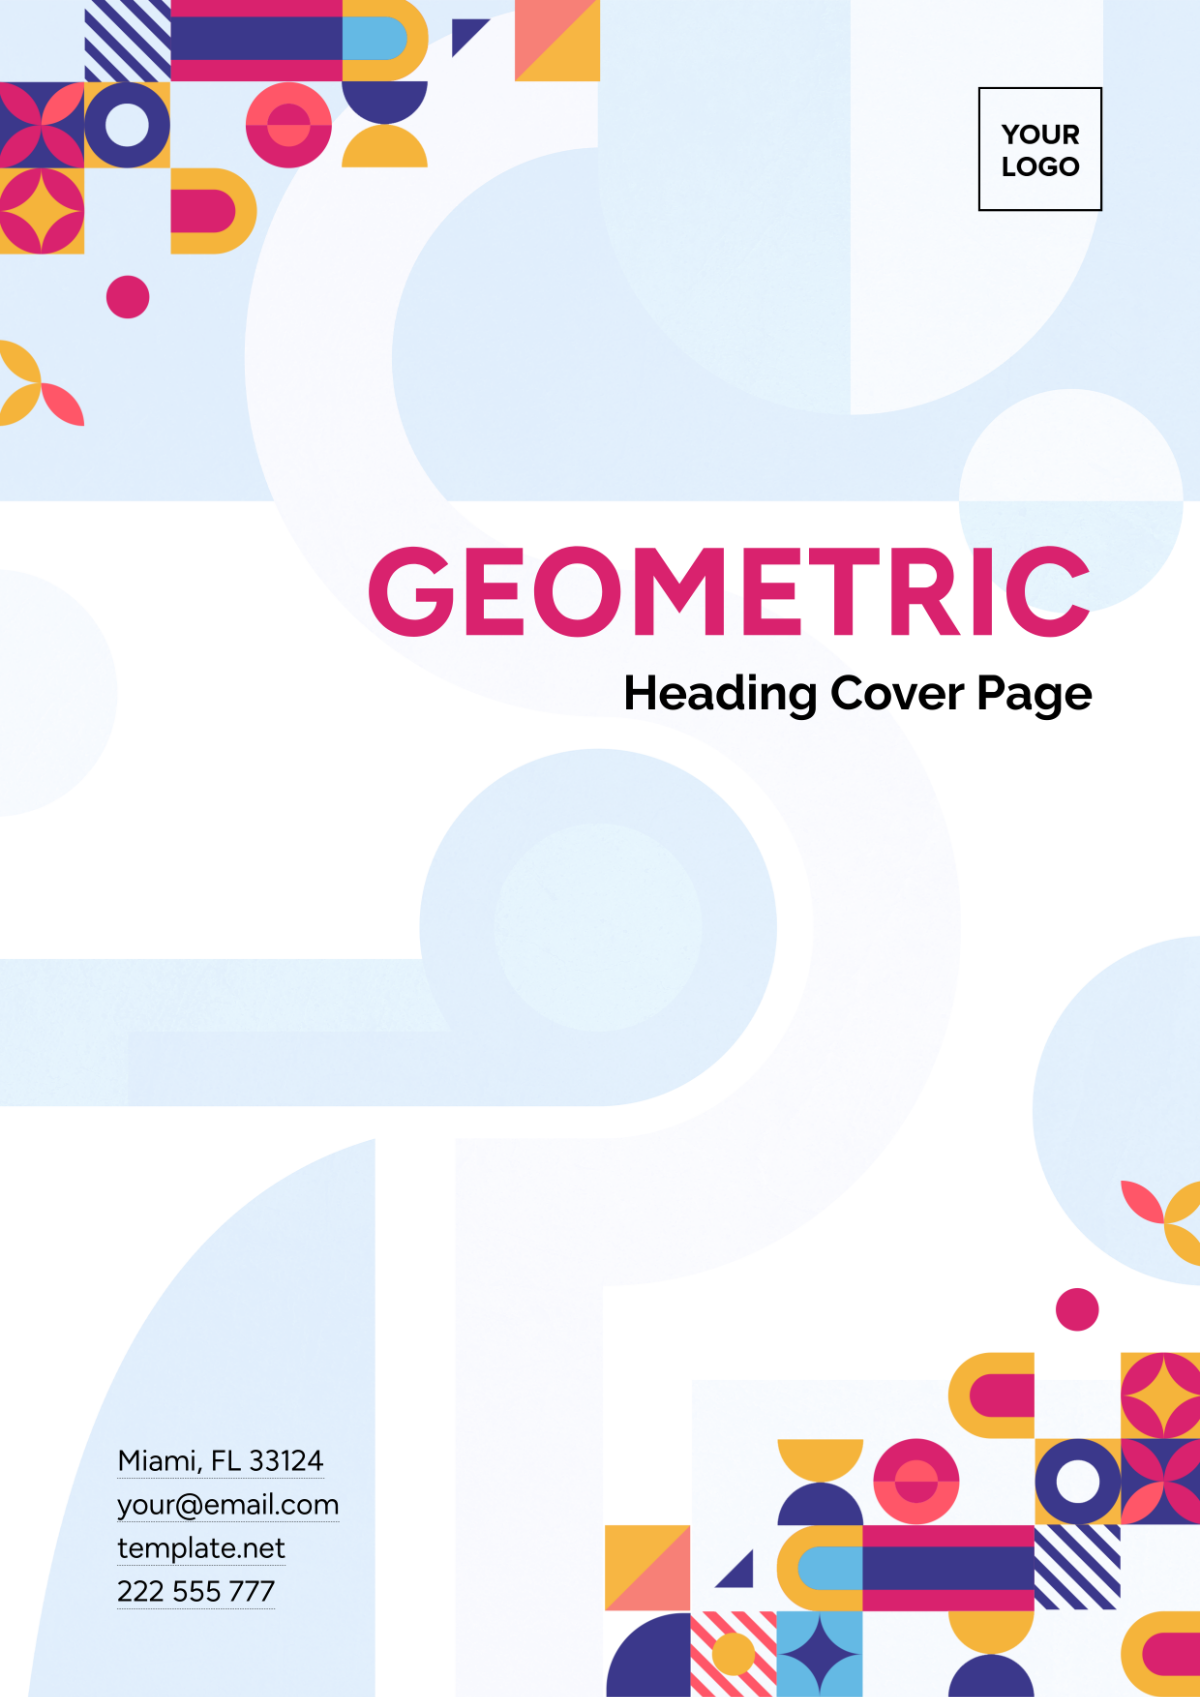 Geometric Heading Cover Page Template